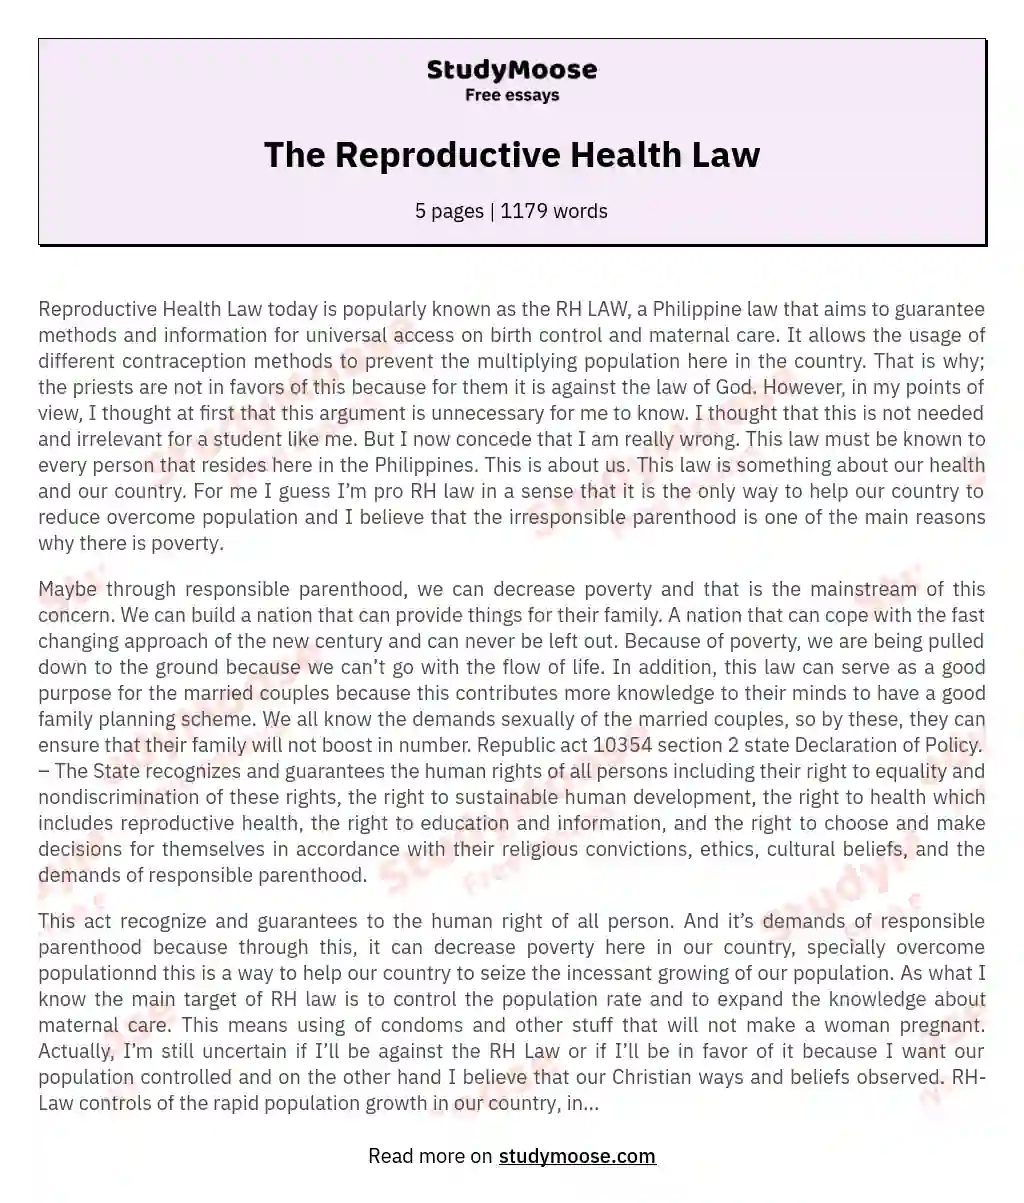 The Reproductive Health Law essay